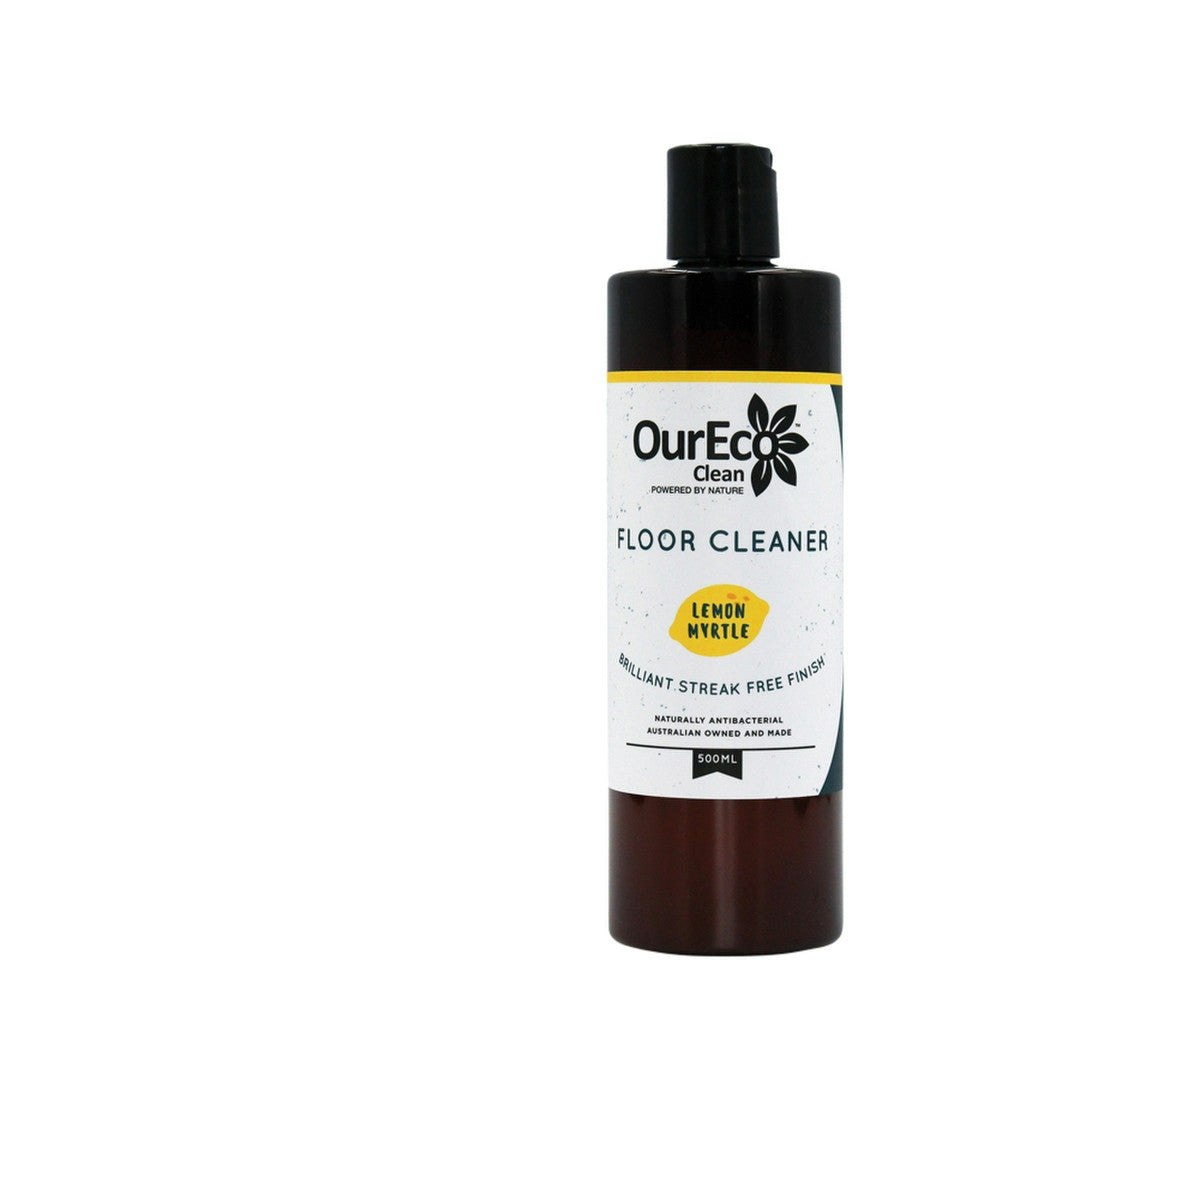 image of OurEco Clean Floor Cleaner Lemon Myrtle 500ml on white background